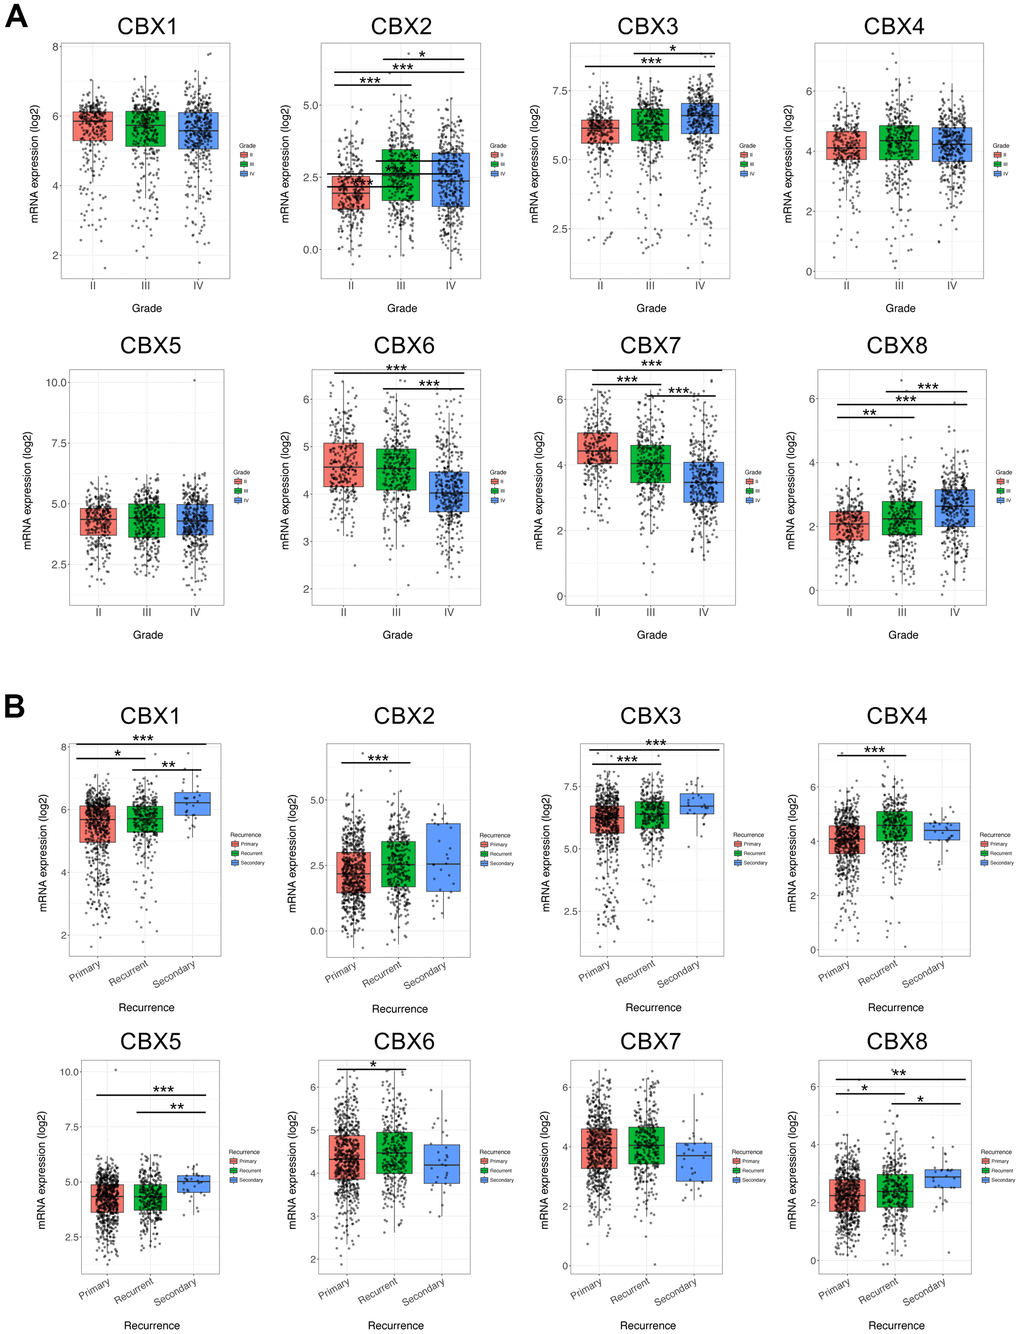 Association of CBXs transcript levels with clinical pathology. (A) Relationships between mRNA expression levels of eight CBX members and tumor grades of GBM. (B) Relationships between mRNA expression levels of eight CBX members and recurrent status of GBM. Analyses were conducted using GlioVis. * p p p 